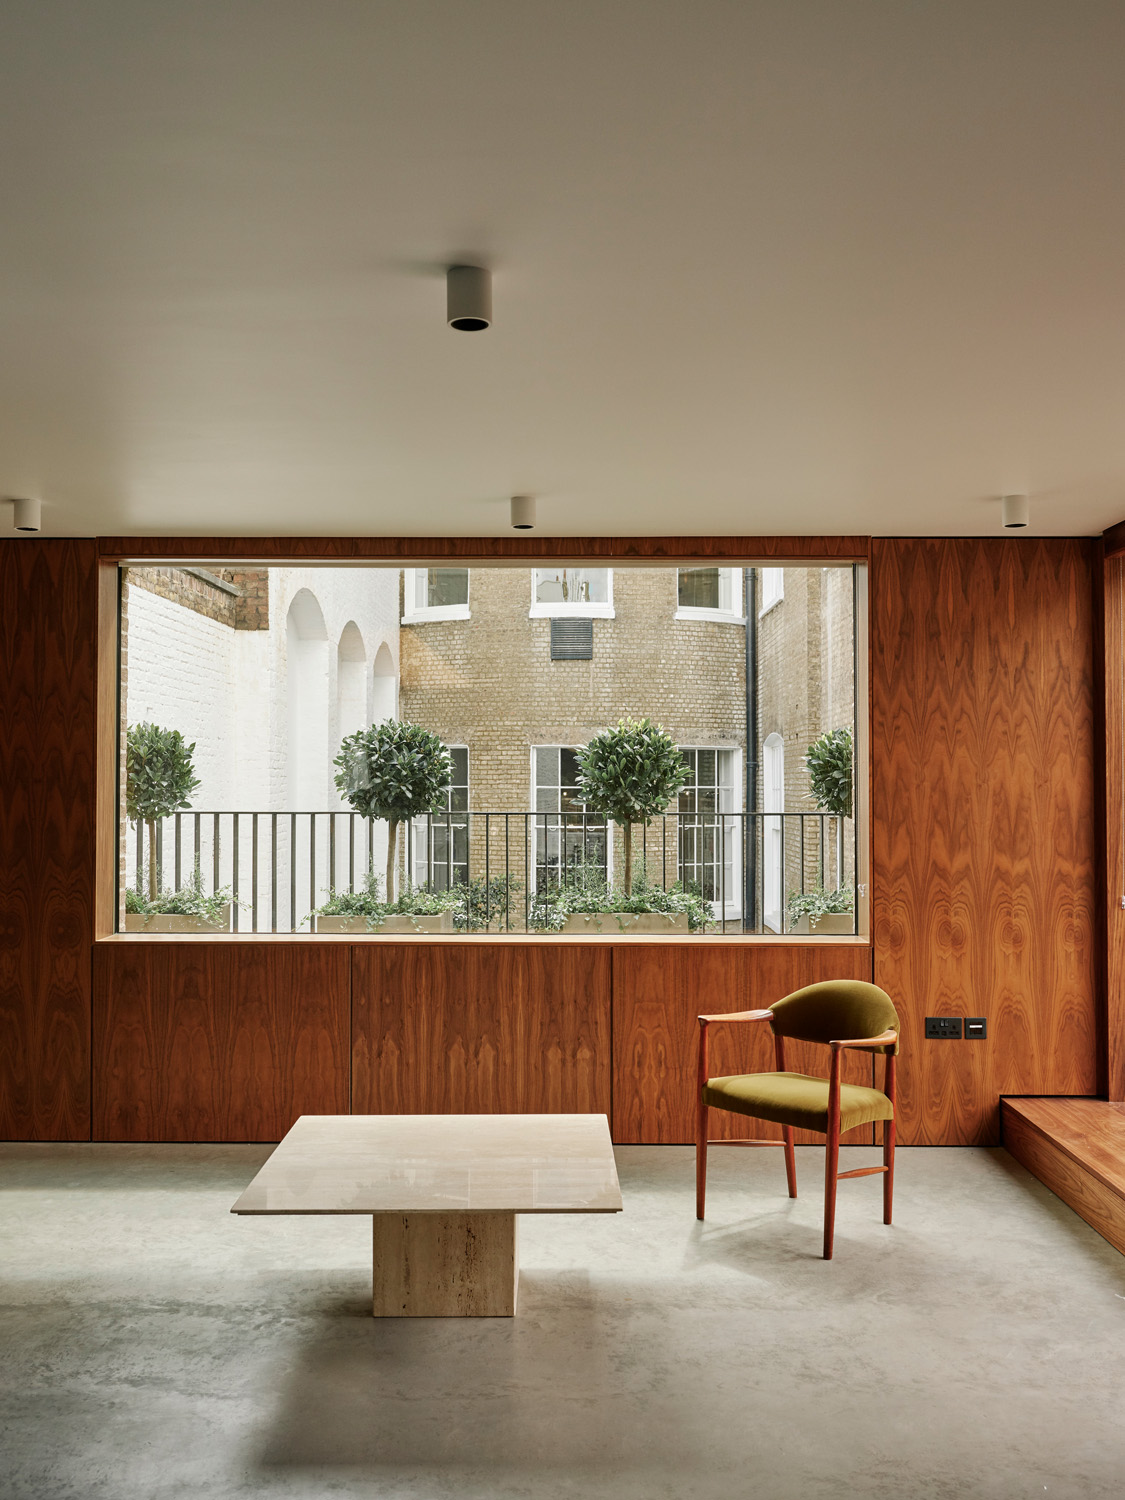 Table and chair by Morrow + Lorraine - contemporary architecture design studio in London